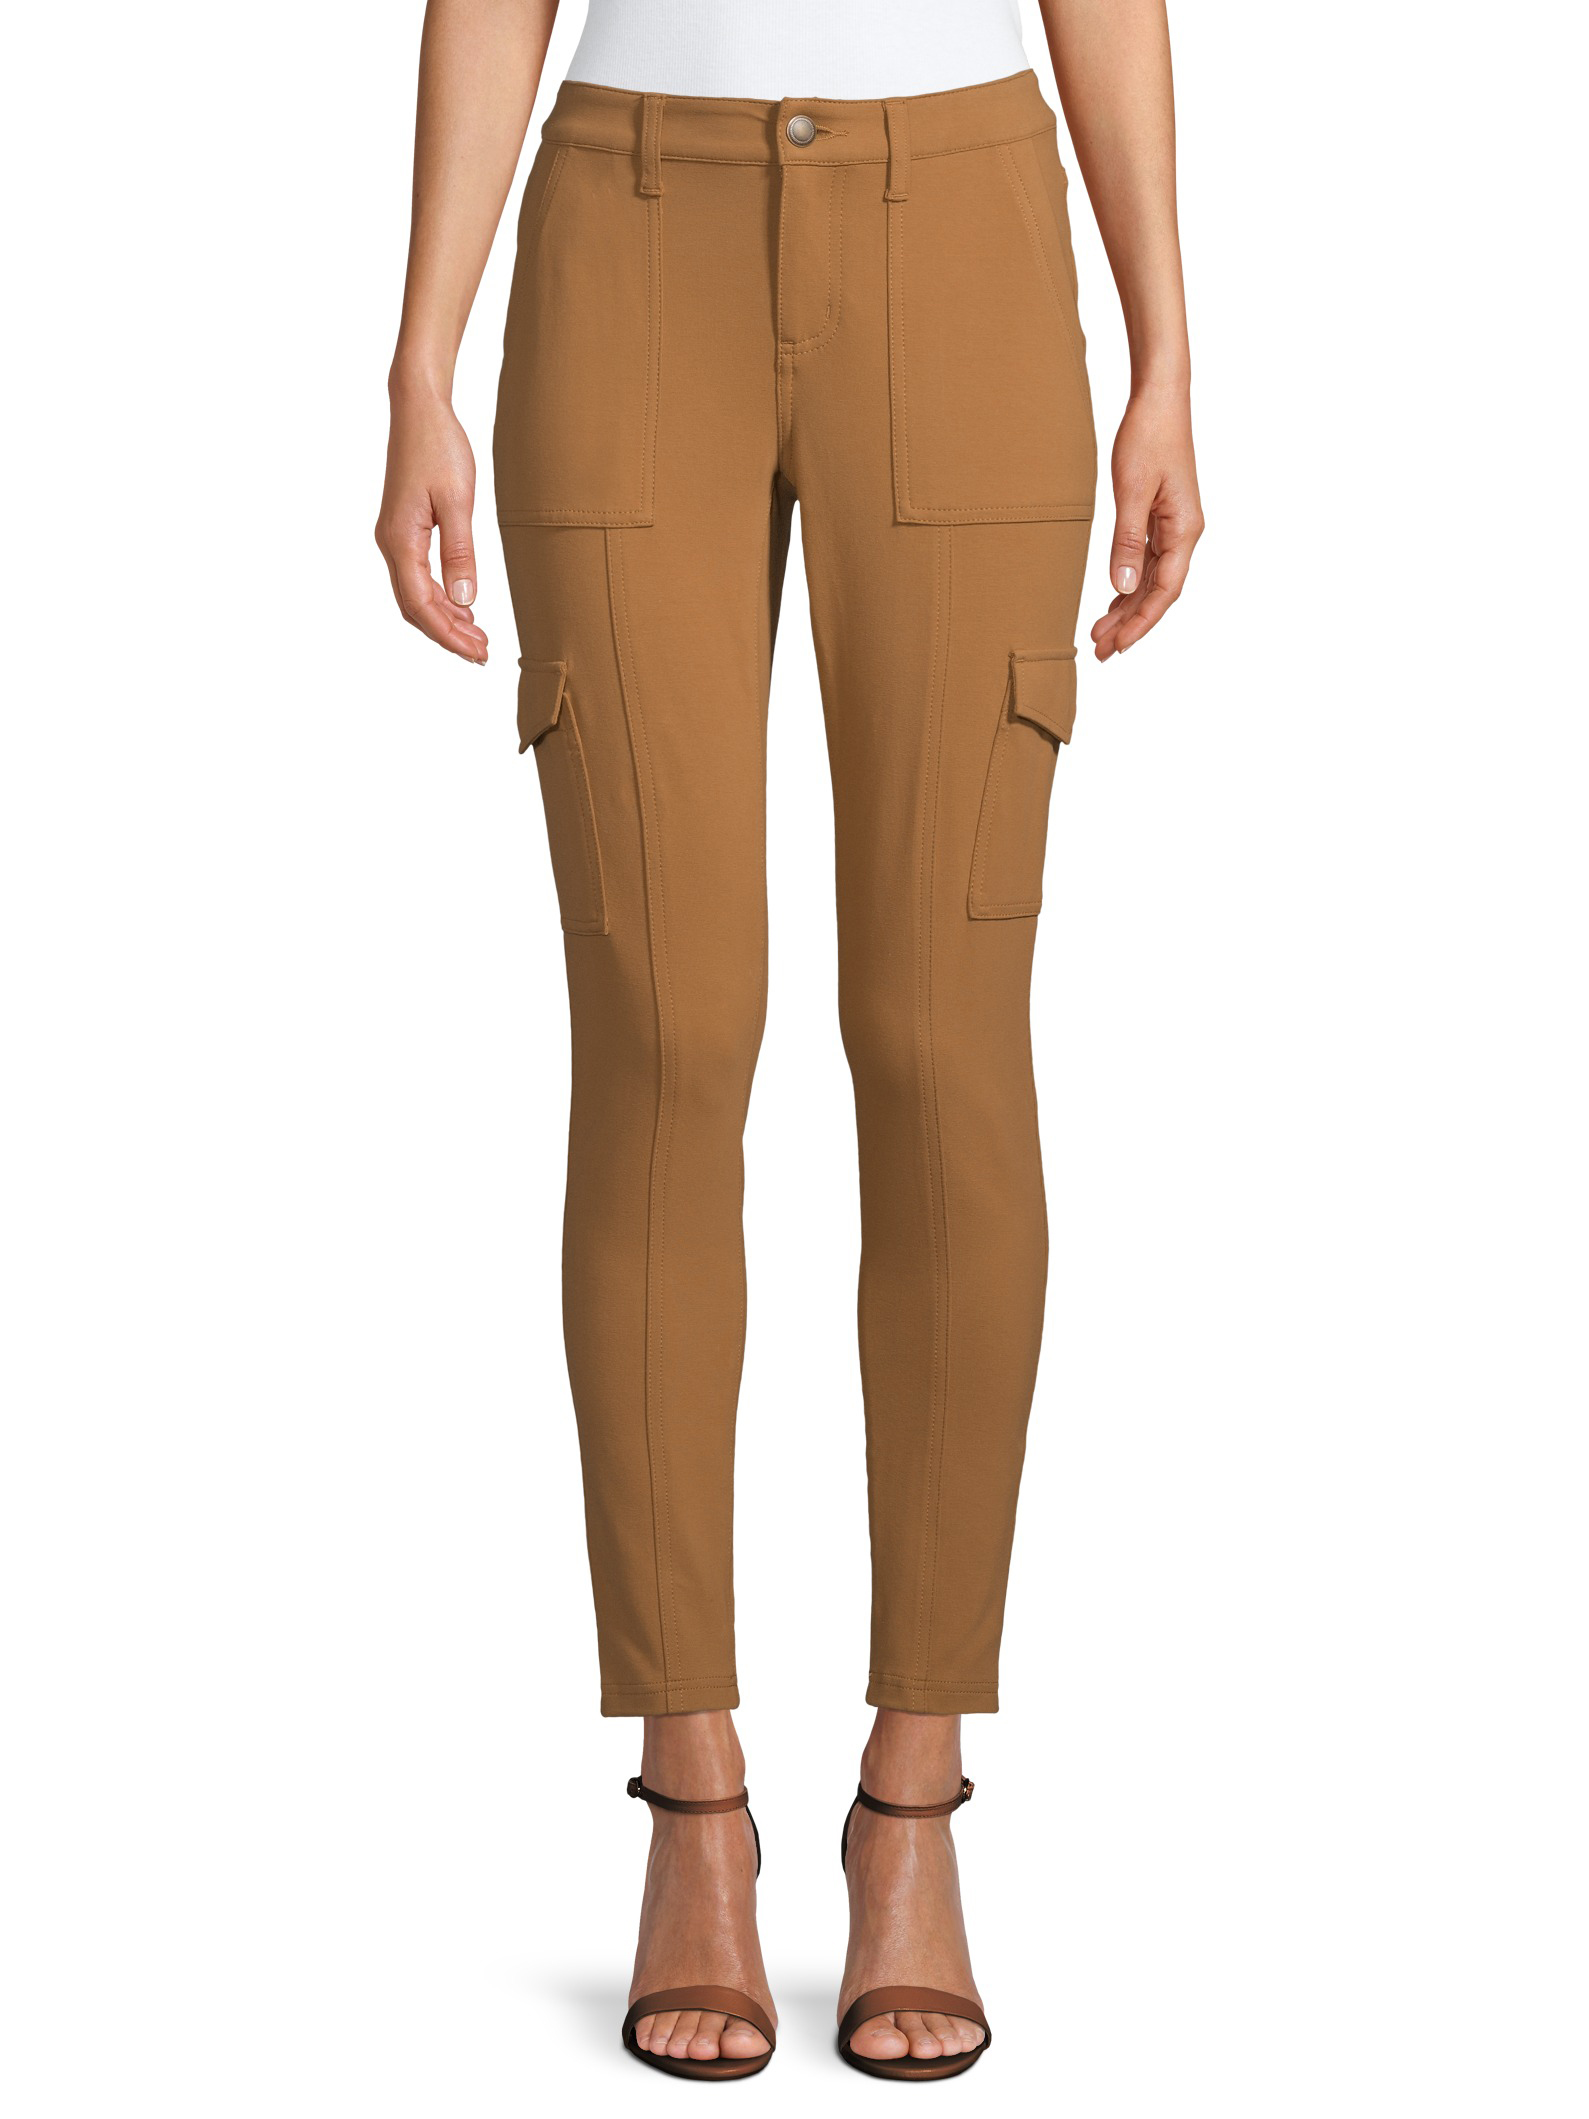 Buy Time and Tru Womens Knit Skinny Cargo Pant at Ubuy Ghana